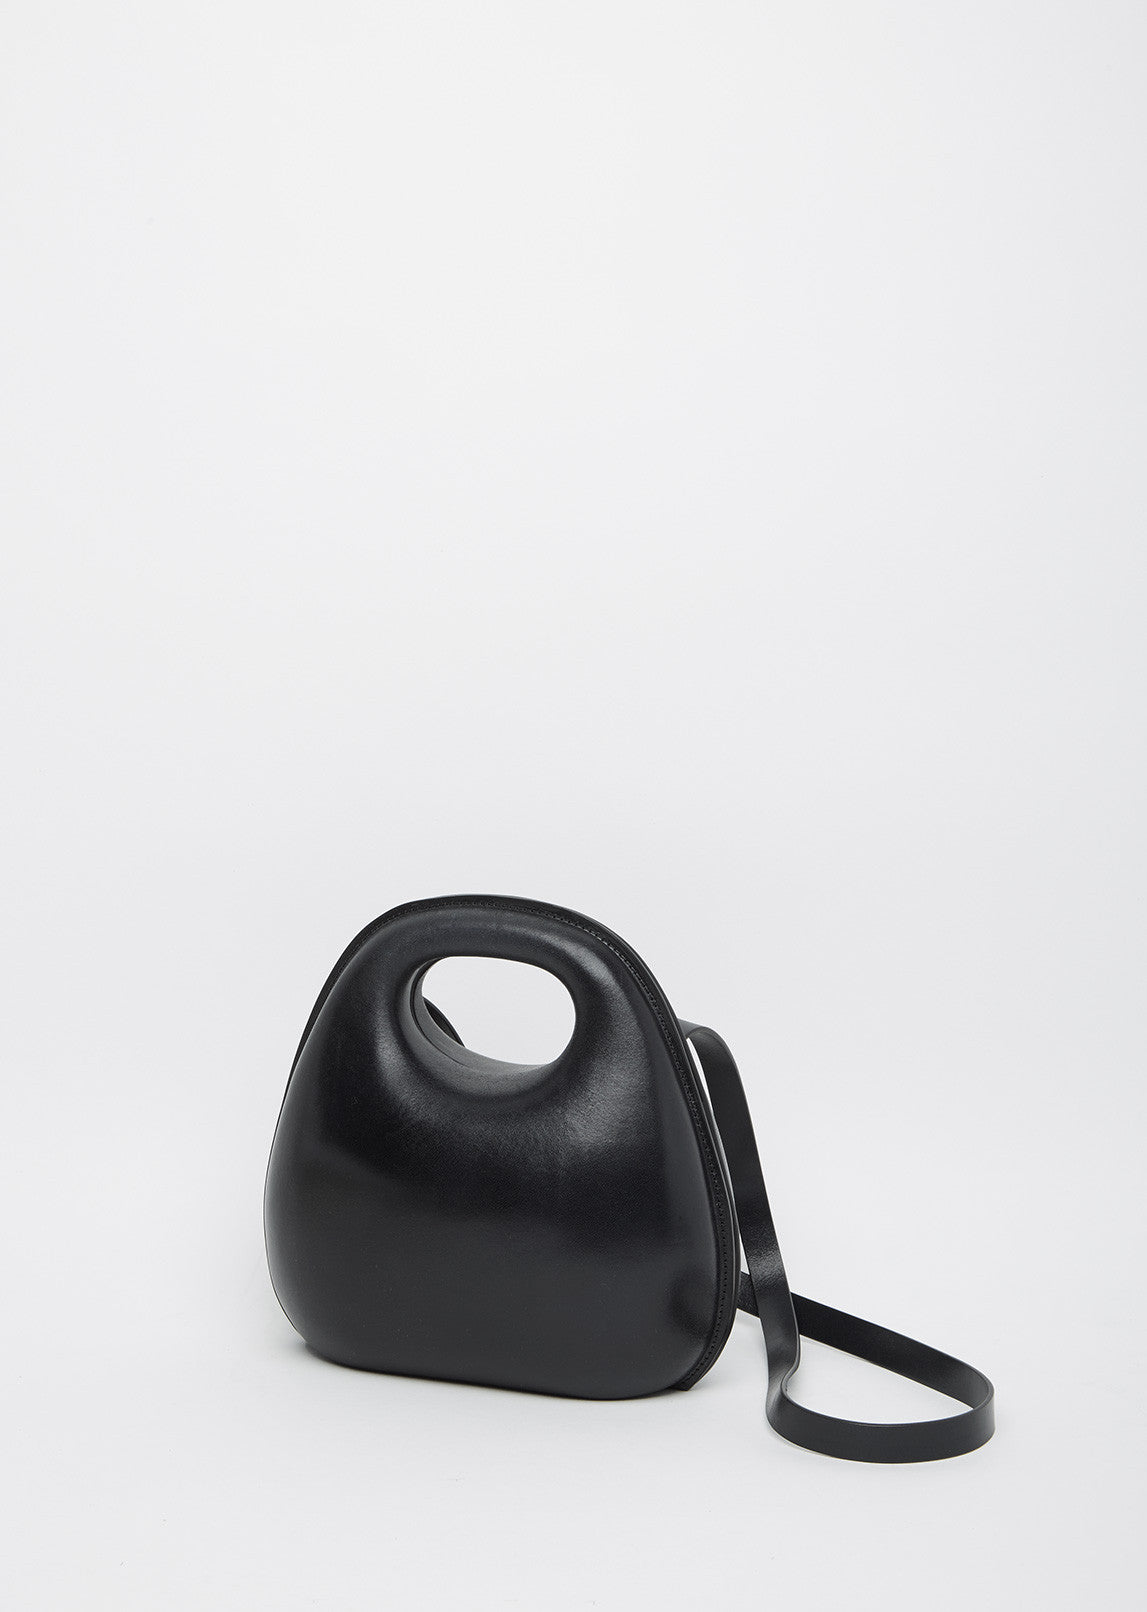 Lemaire, Bags, Lemaire Egg Bag